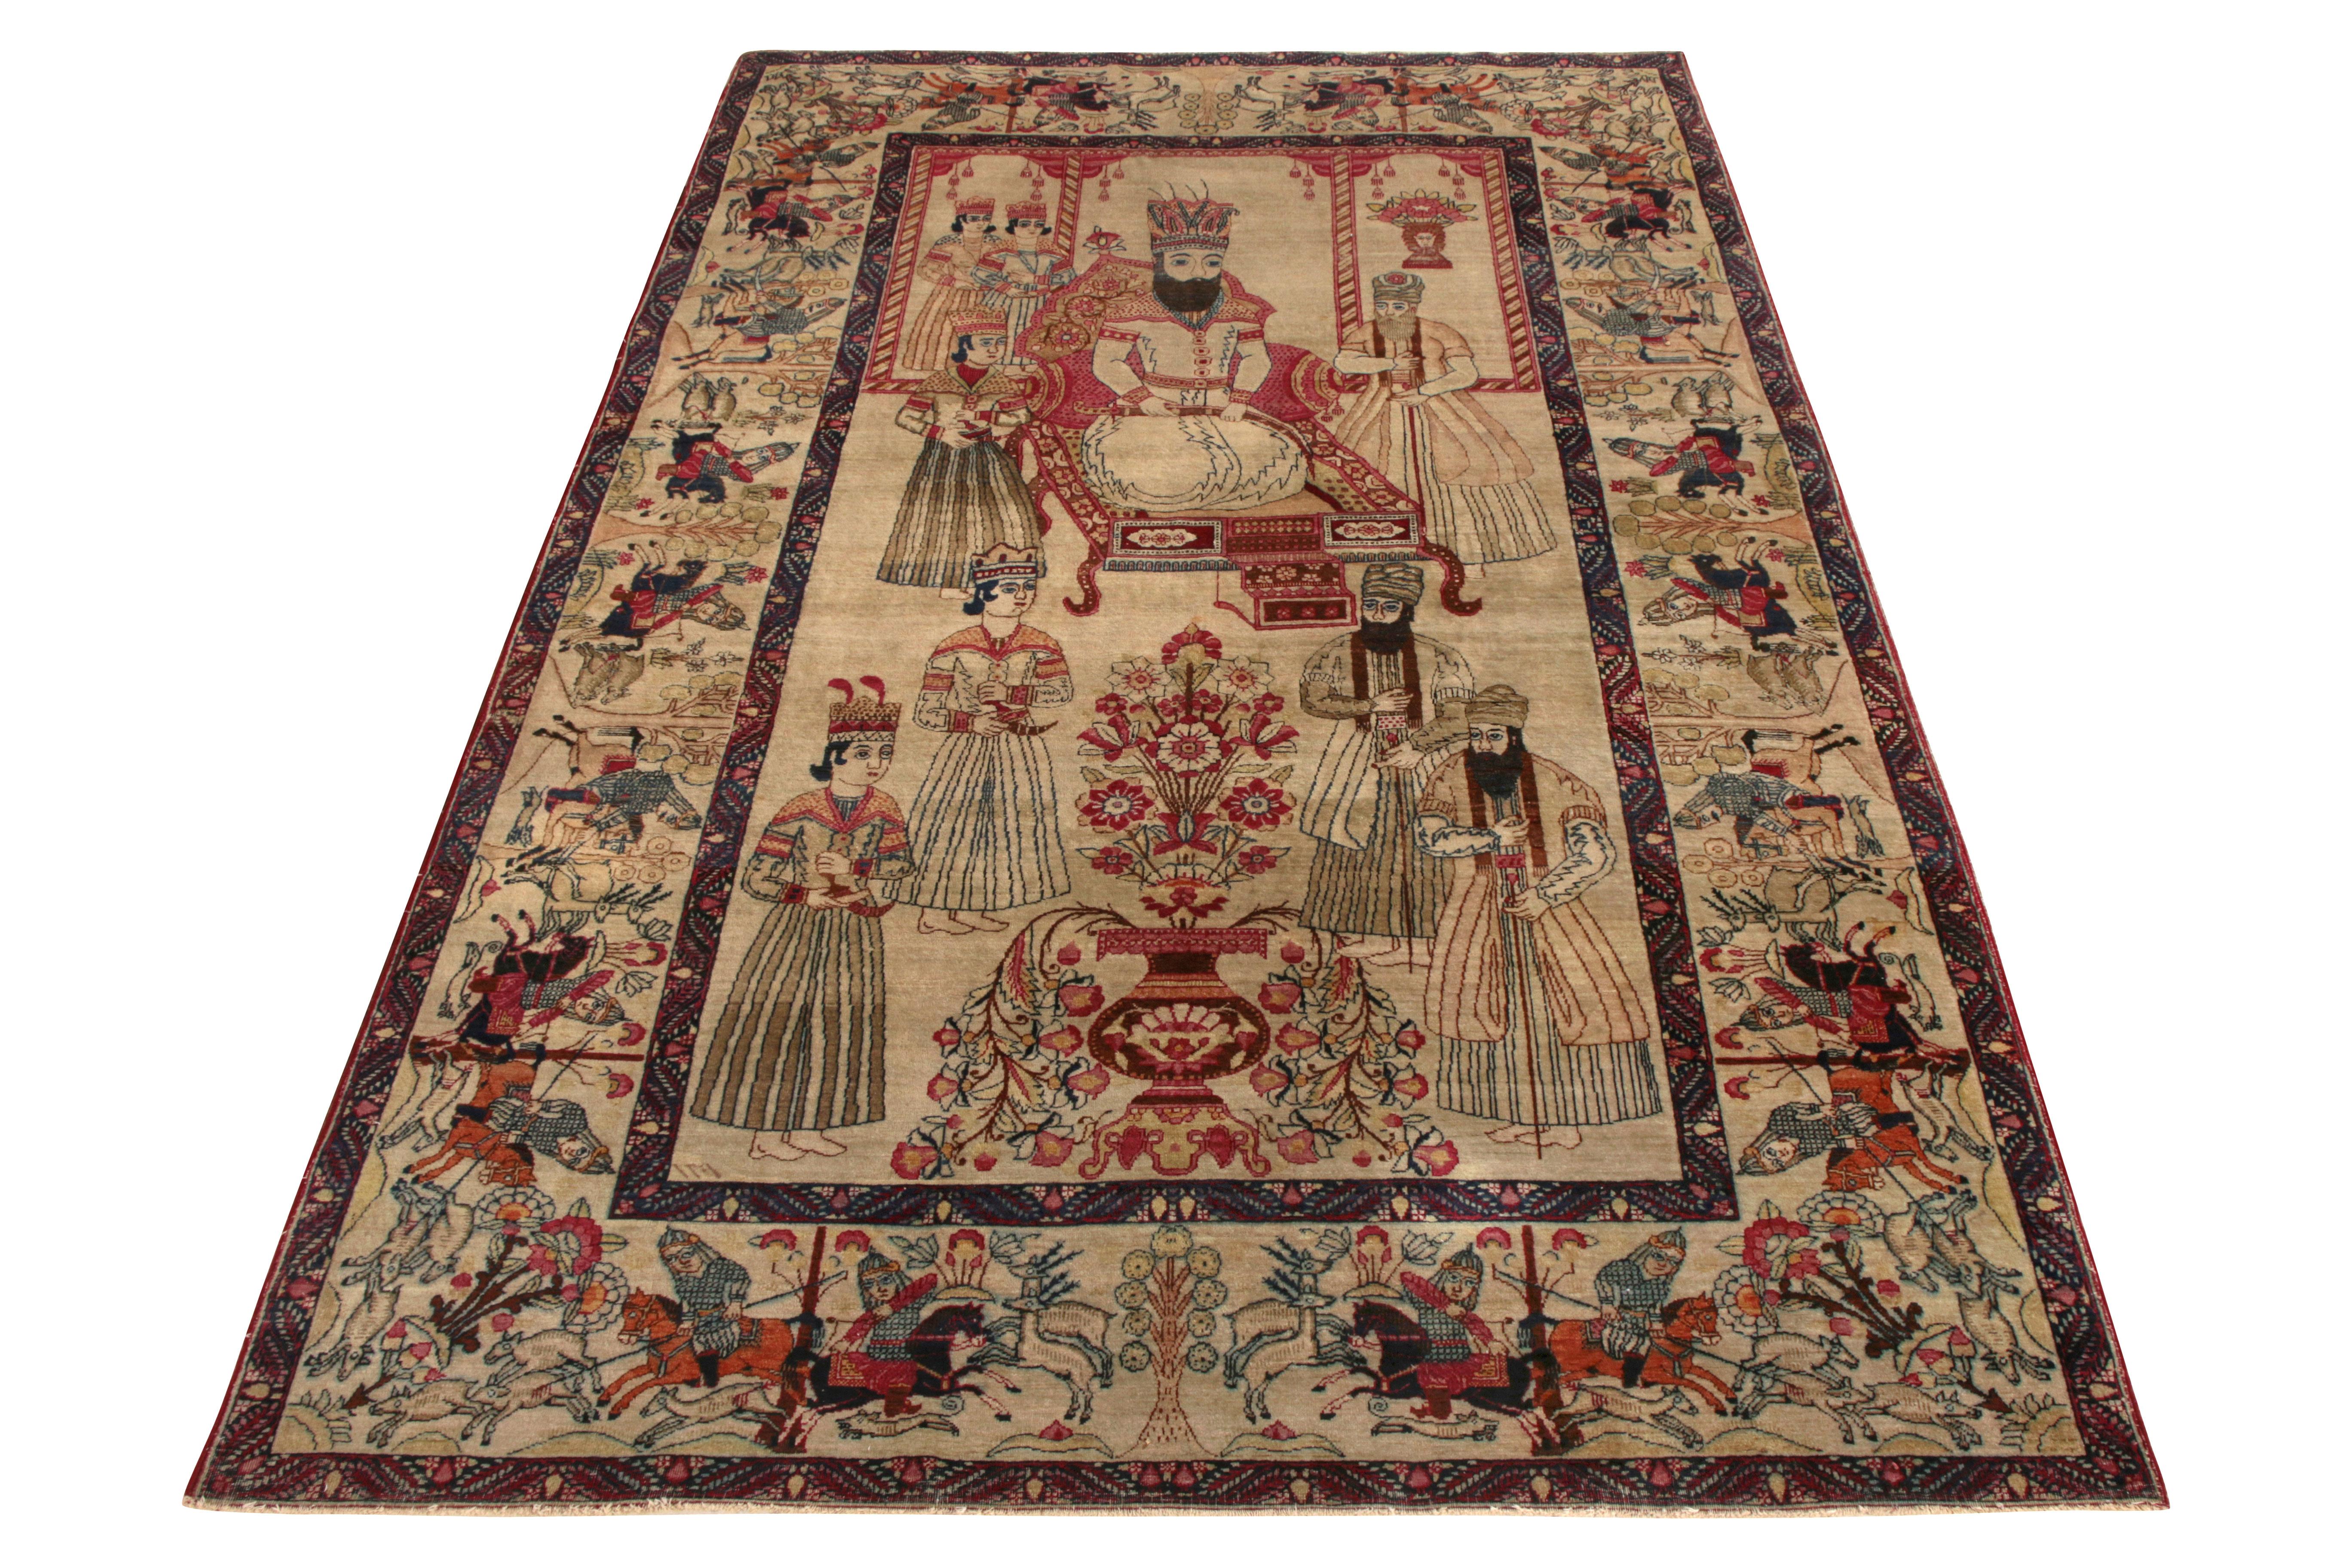 Hand knotted in wool, this 5 x 8 Kerman rug joins Rug & Kilim’s Antique & Vintage collection. The classic rendering of this drawing depicts a royal courtroom in a majestic setting, complemented by a tasteful mix of bold Blue and Red against a lush